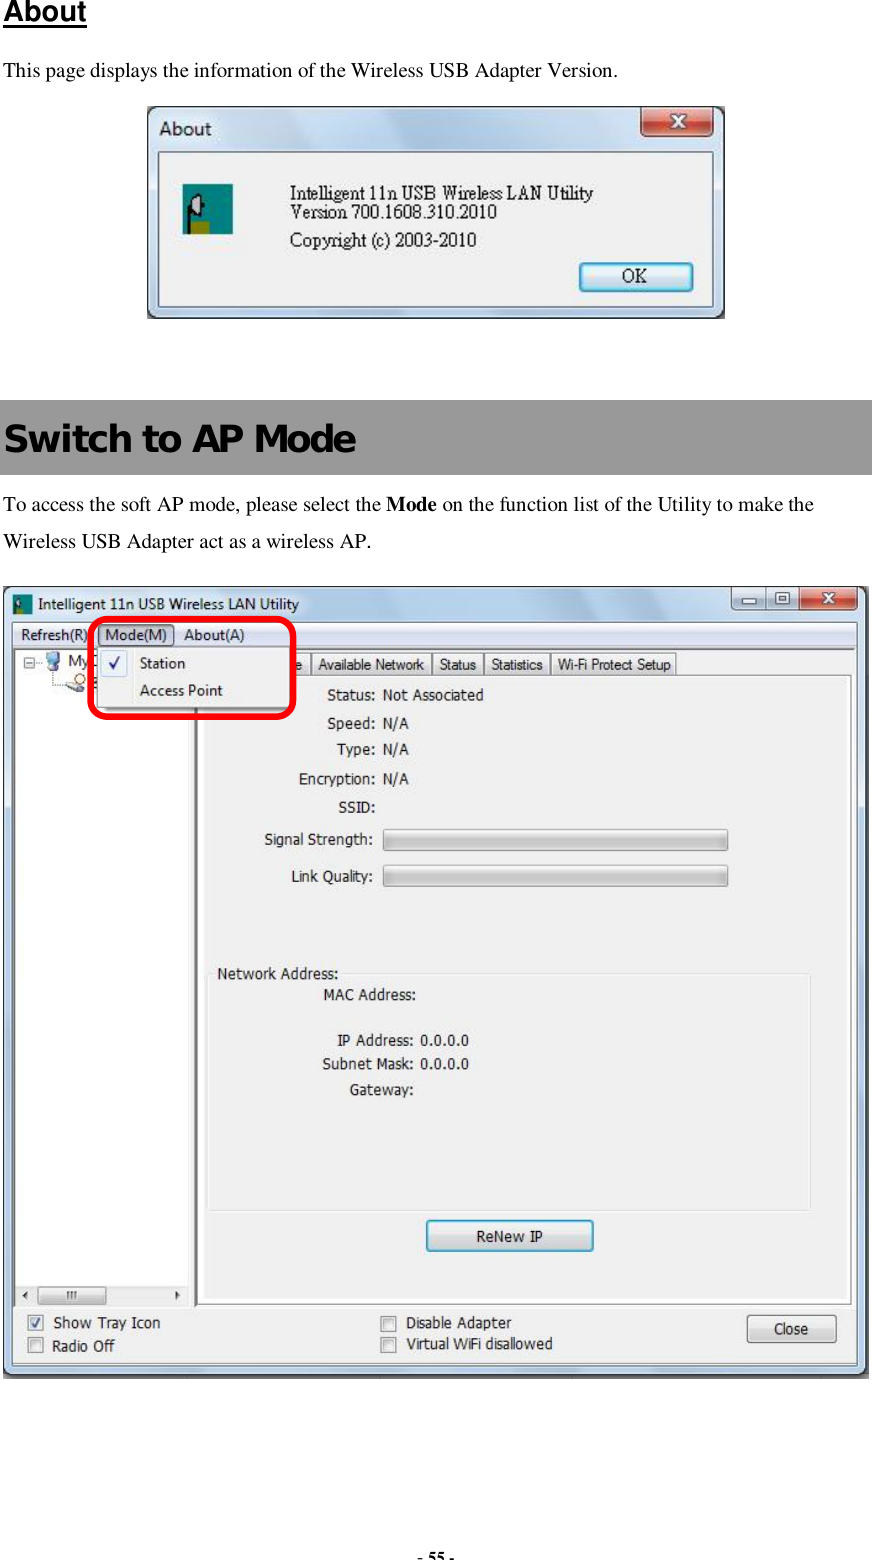  - 55 - About This page displays the information of the Wireless USB Adapter Version.    Switch to AP Mode To access the soft AP mode, please select the Mode on the function list of the Utility to make the Wireless USB Adapter act as a wireless AP.   